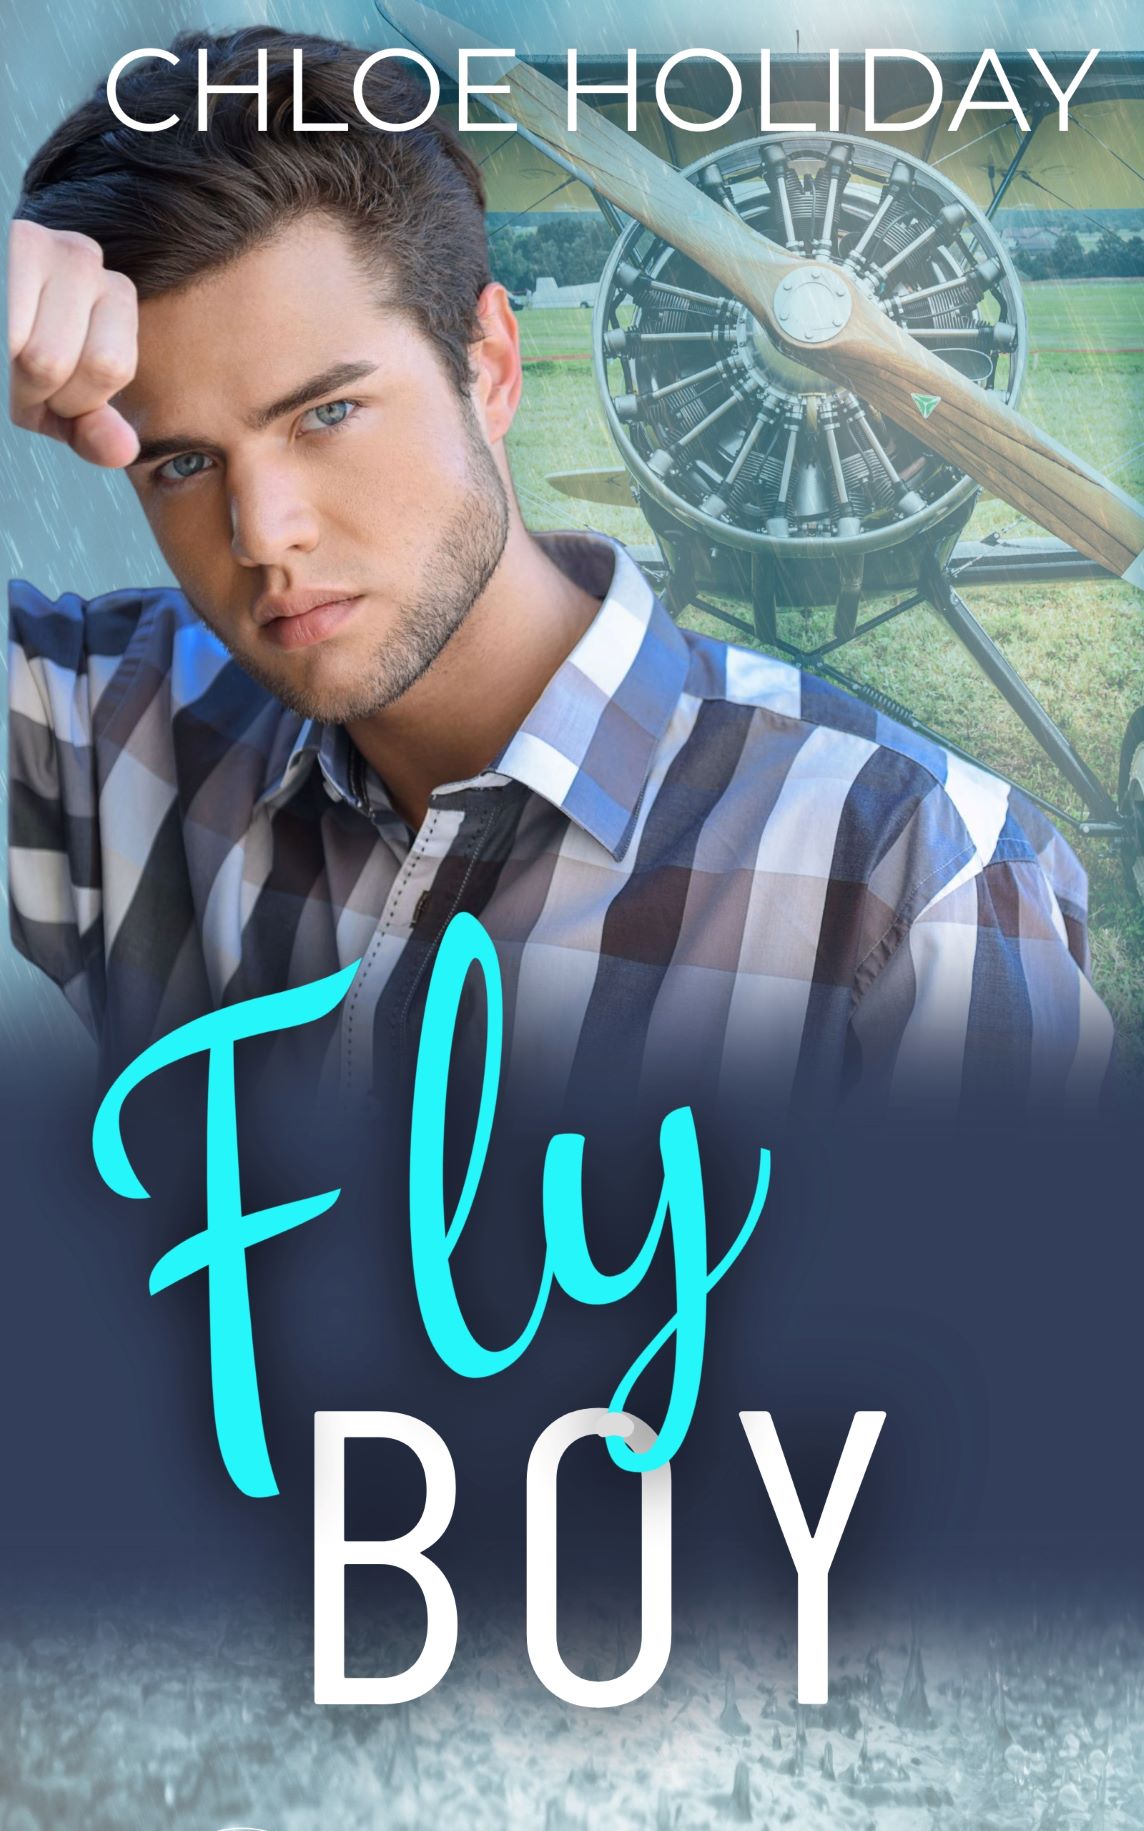 Chloe Holiday's Fly Boy is a small town, enemies to lovers romance which contains action and a mystery.